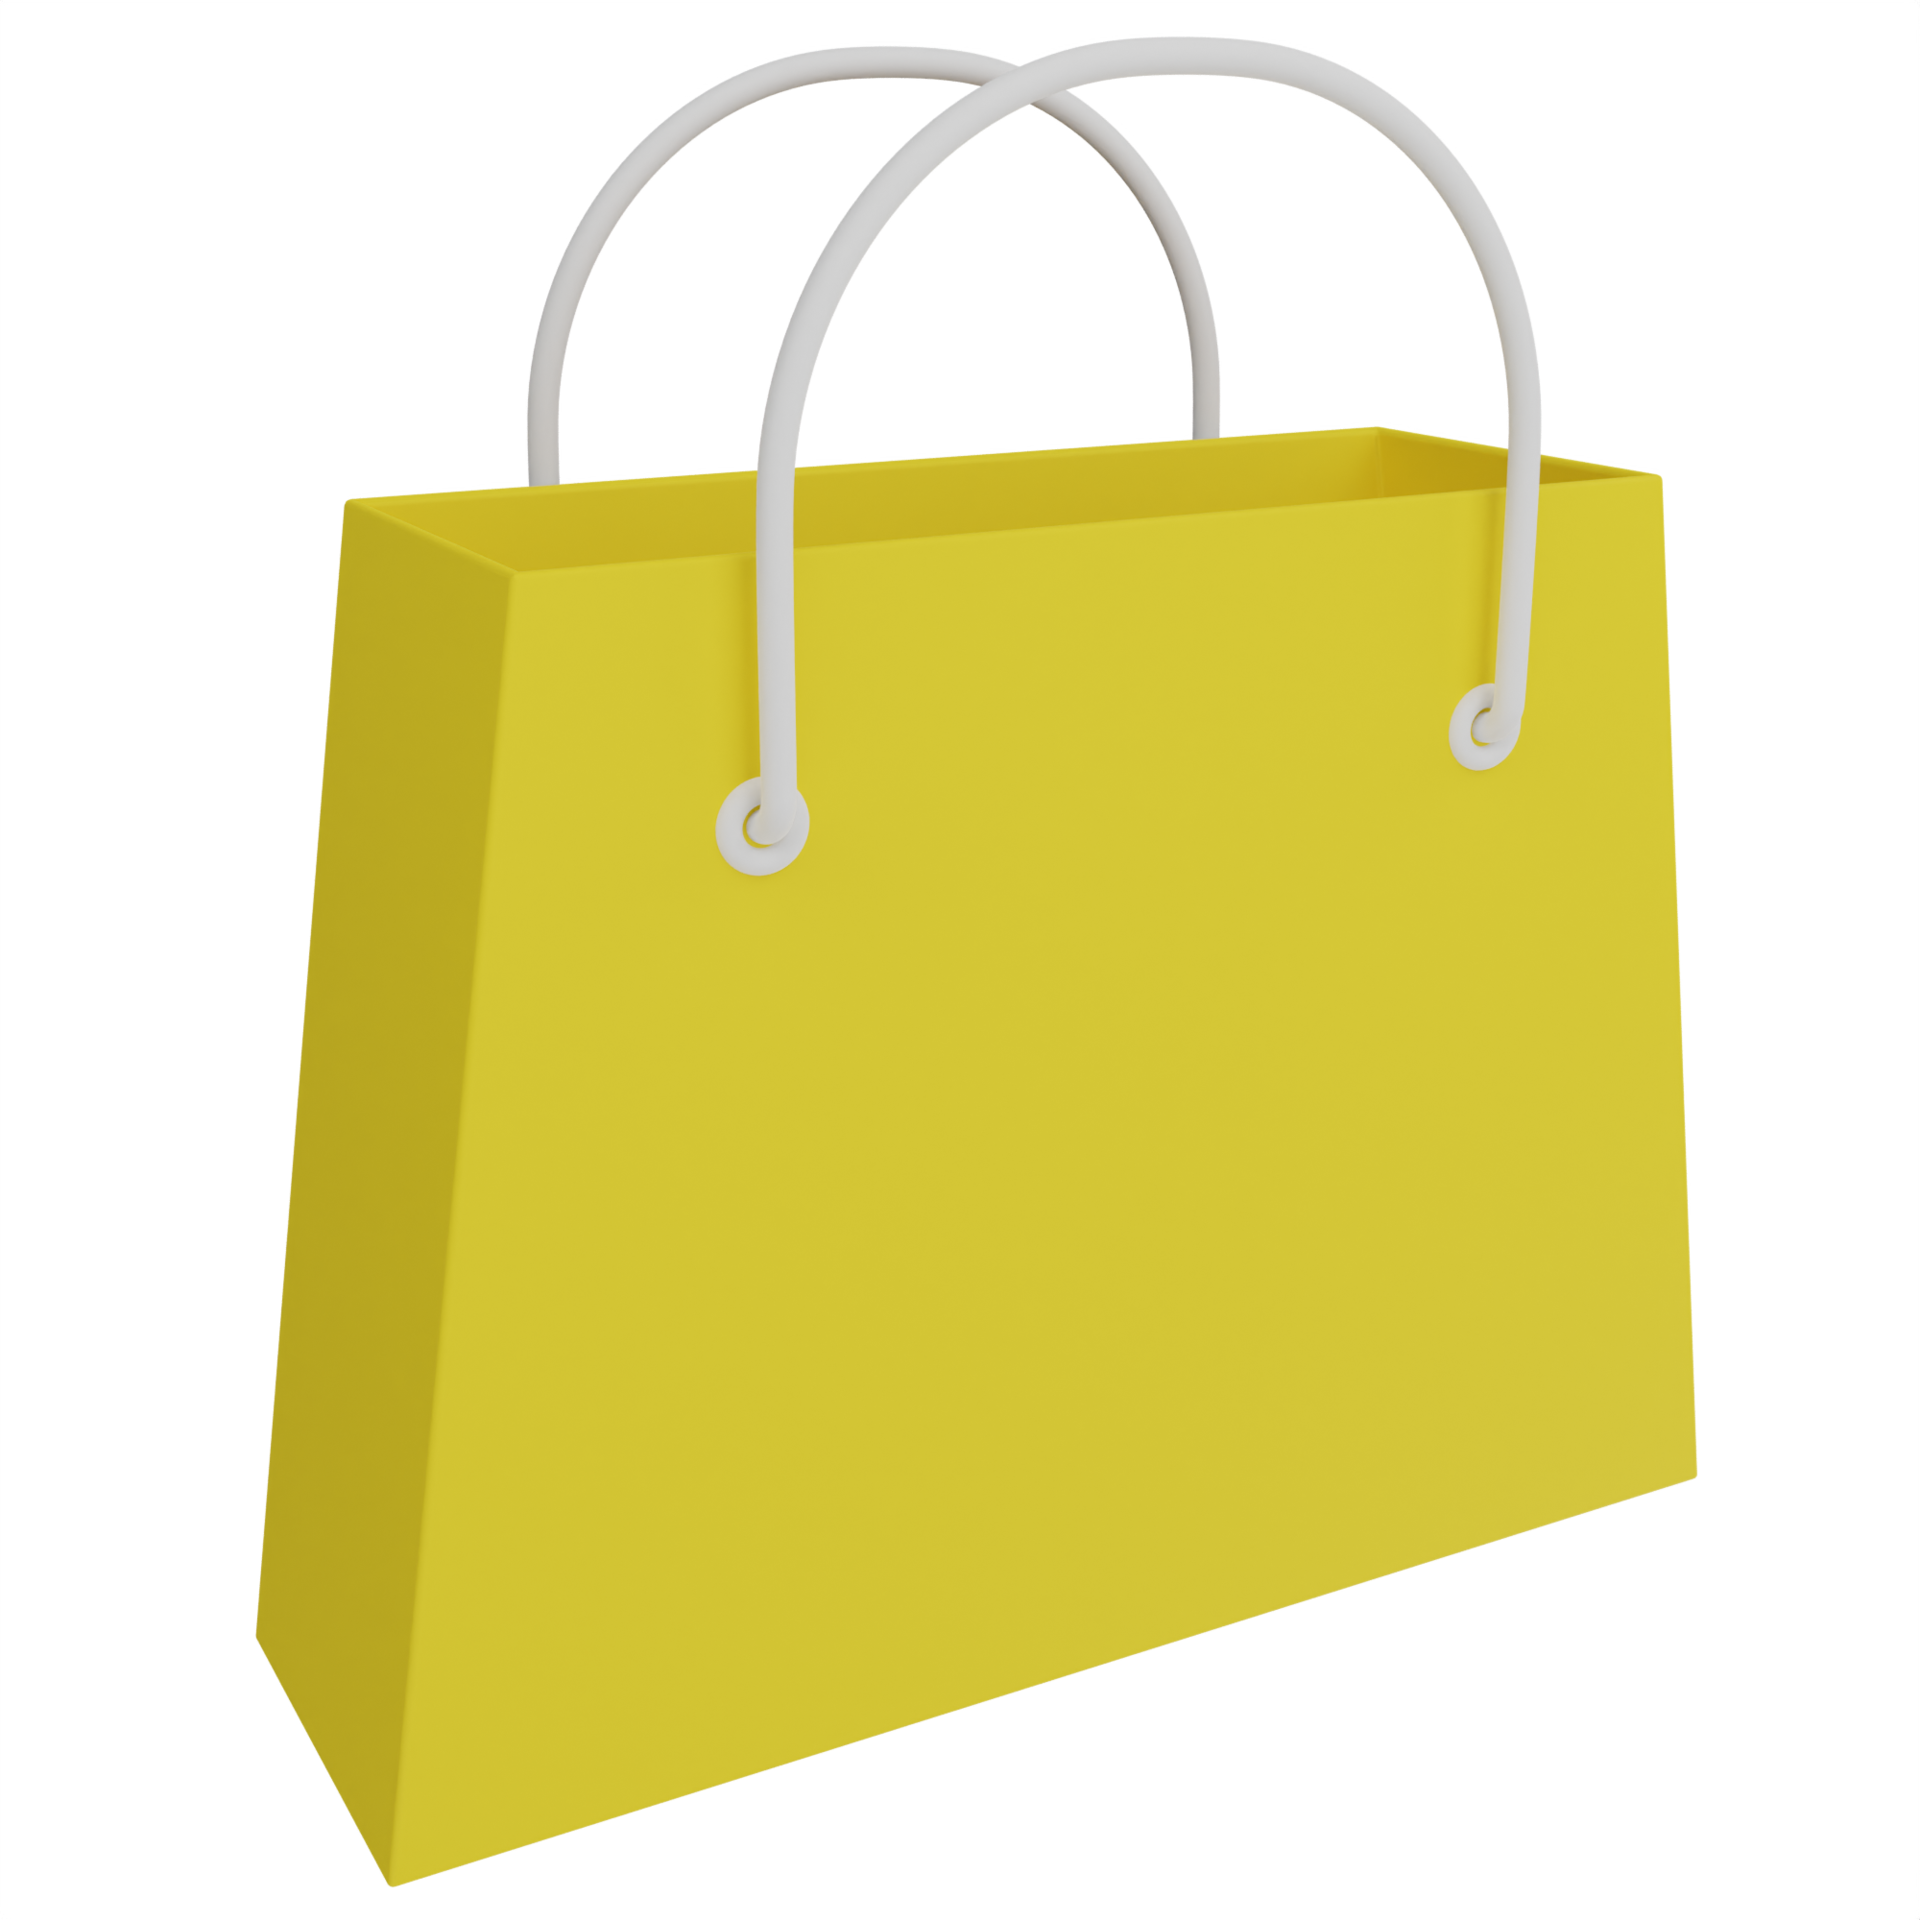 3,550 Shopping Bag Png Images, Stock Photos, 3D objects, & Vectors